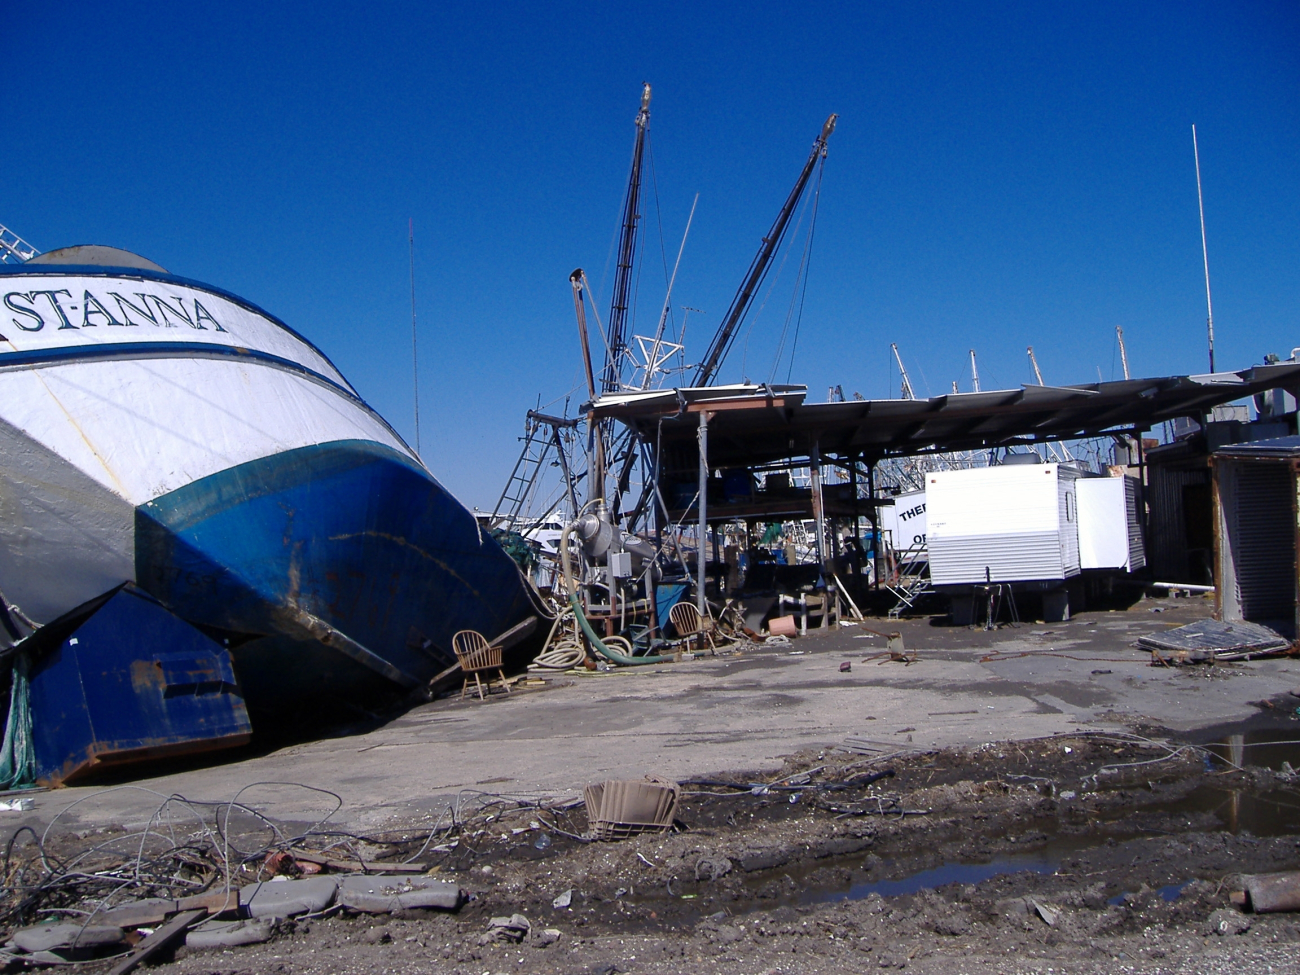 Image #2 showing devastation caused to vessels by Katrina (left image)